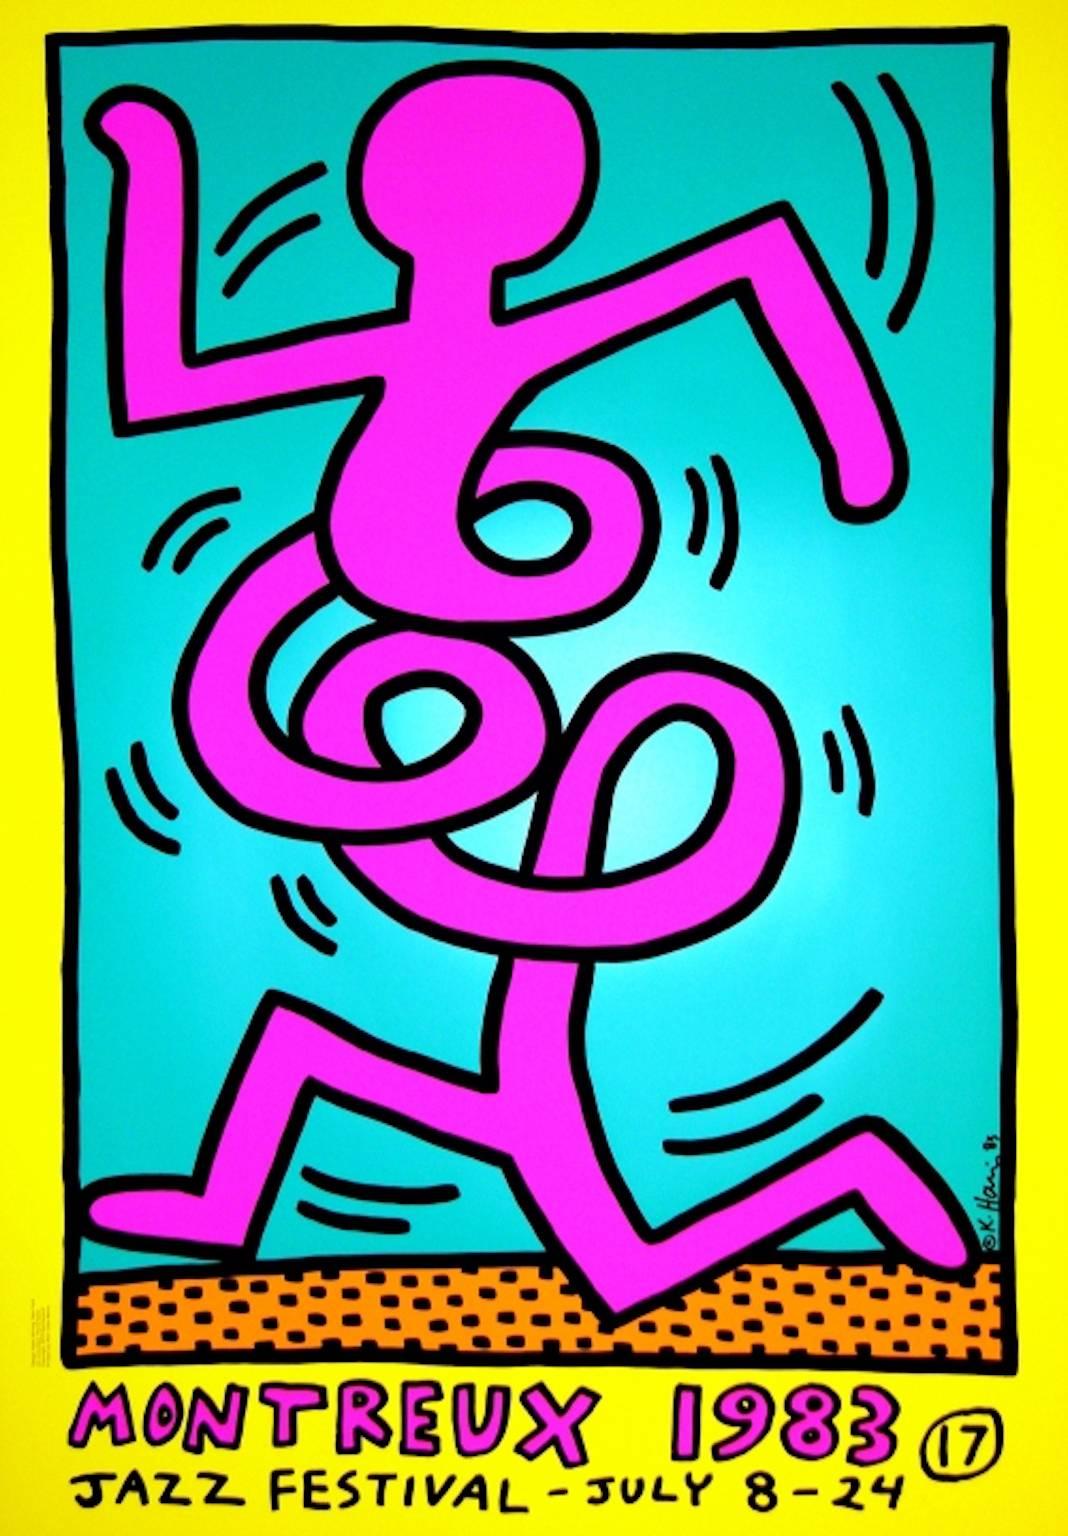 Montreux Jazz Festival (yellow) - Print by Keith Haring